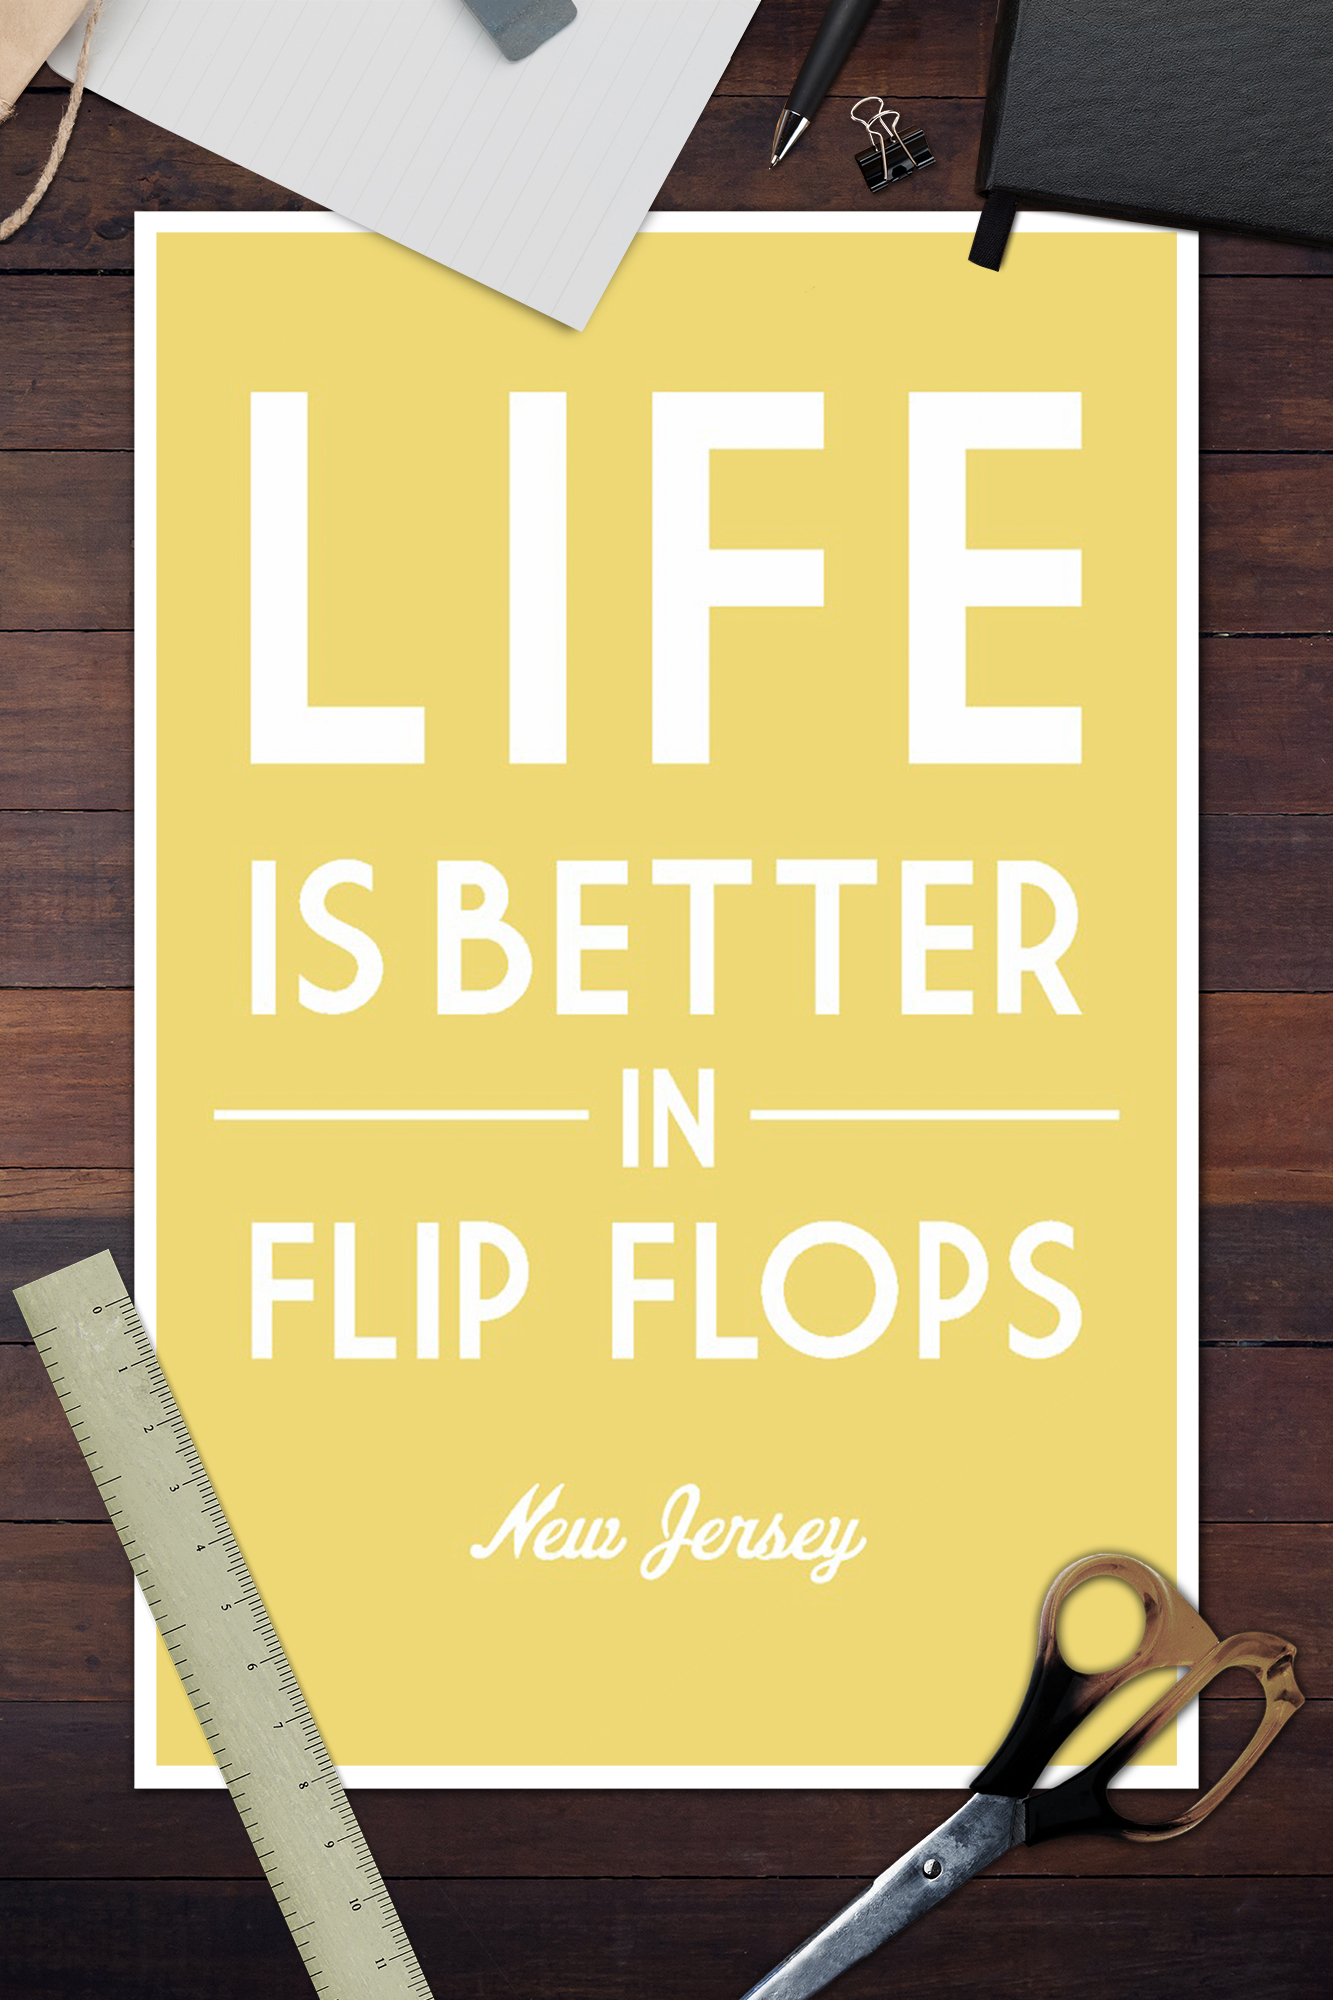 New Jersey, Life is Better in Flip Flops, Simply Said (12x18 Wall Art Poster, Room Decor) - image 3 of 3